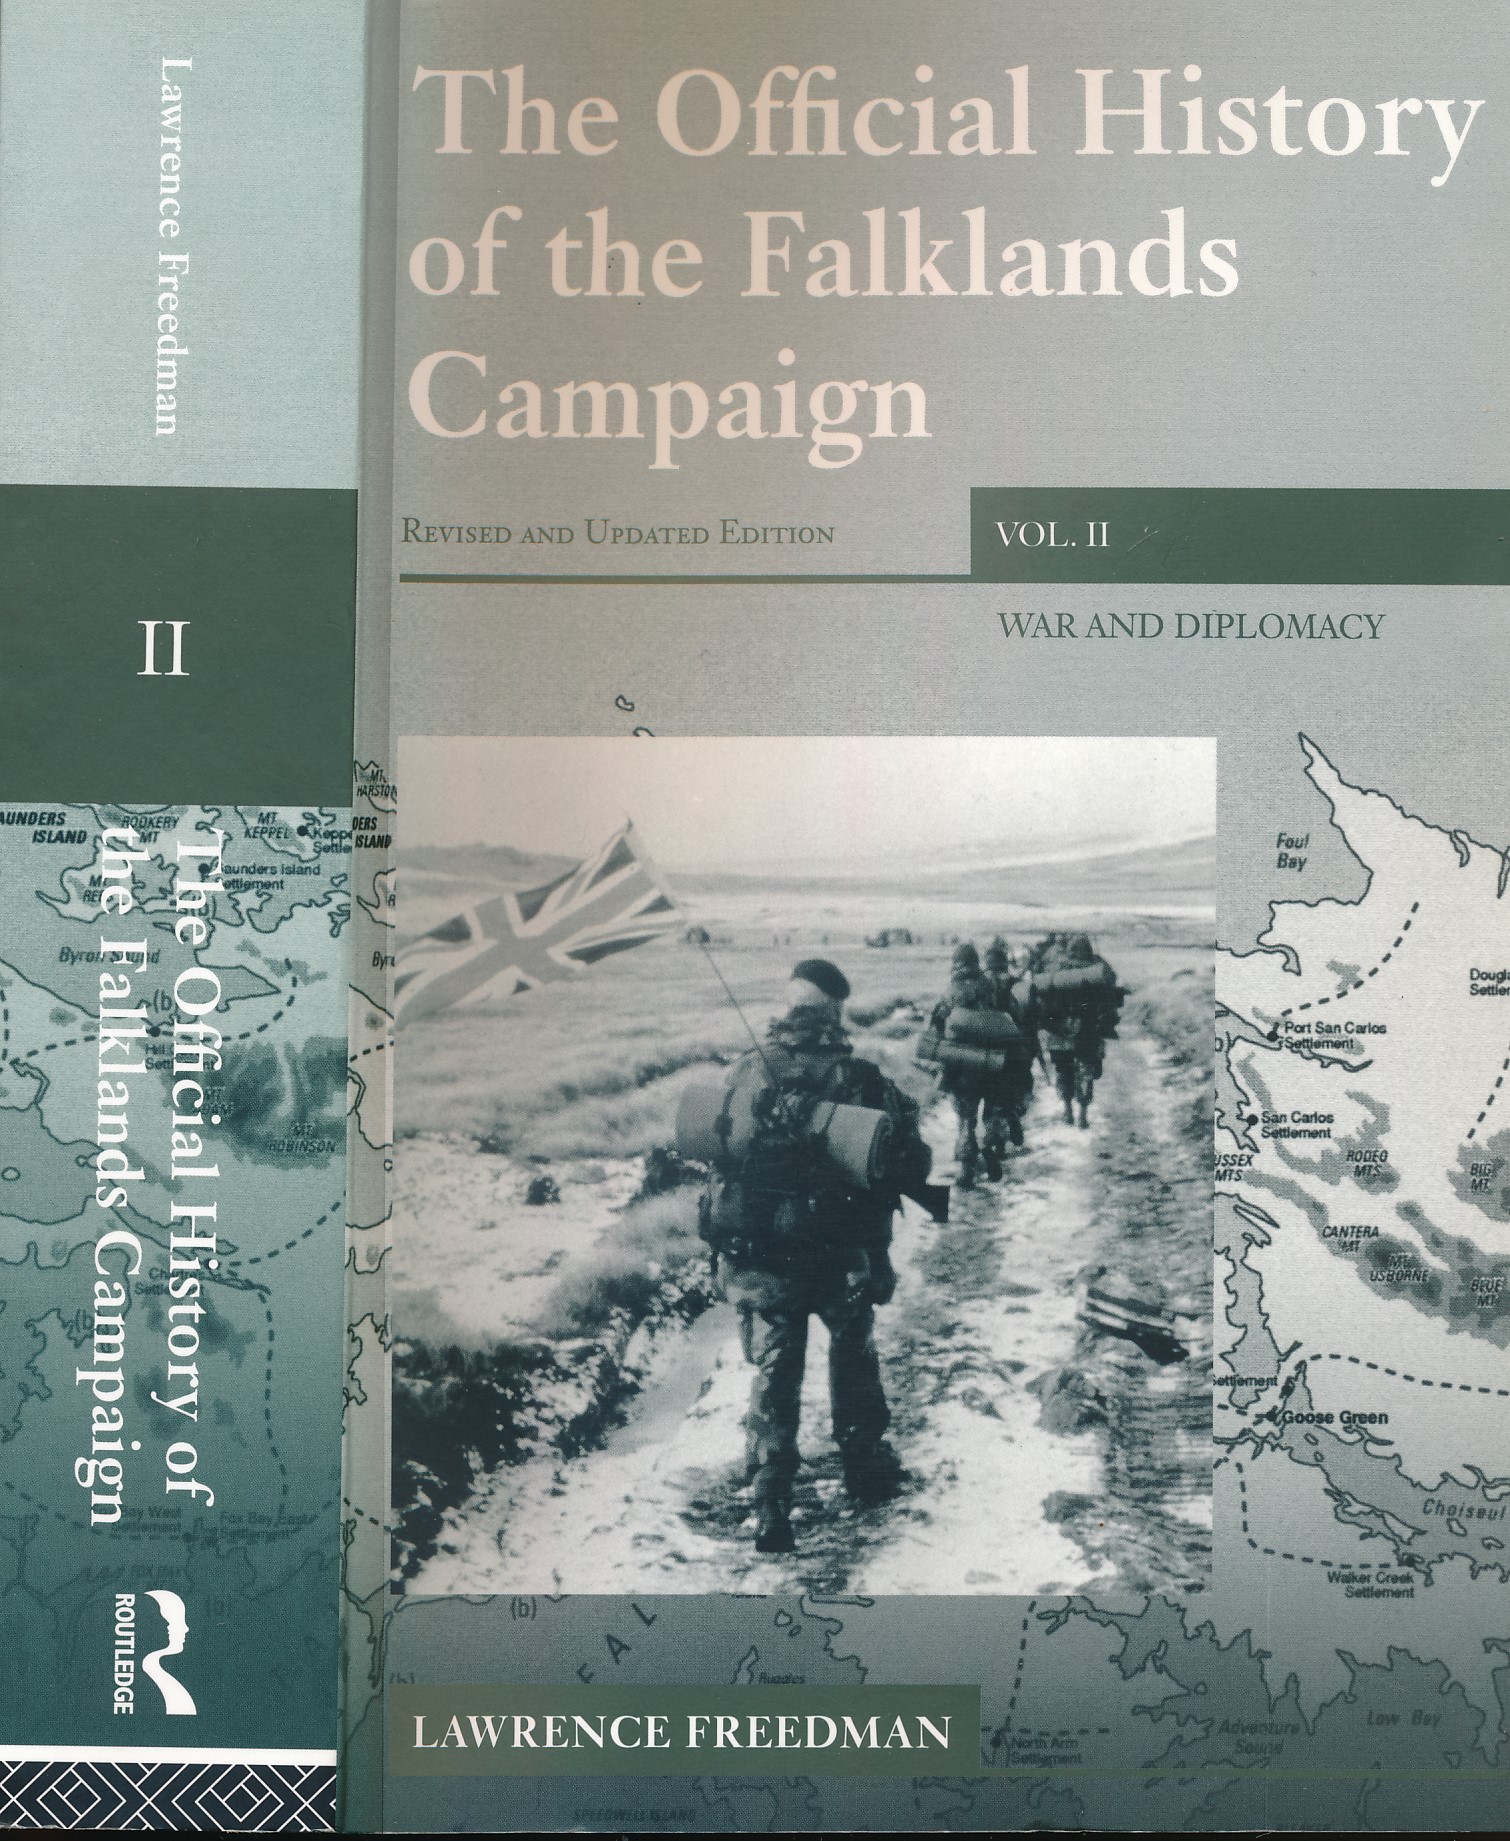 The Official History of the Falklands. Volume II War and Diplomacy